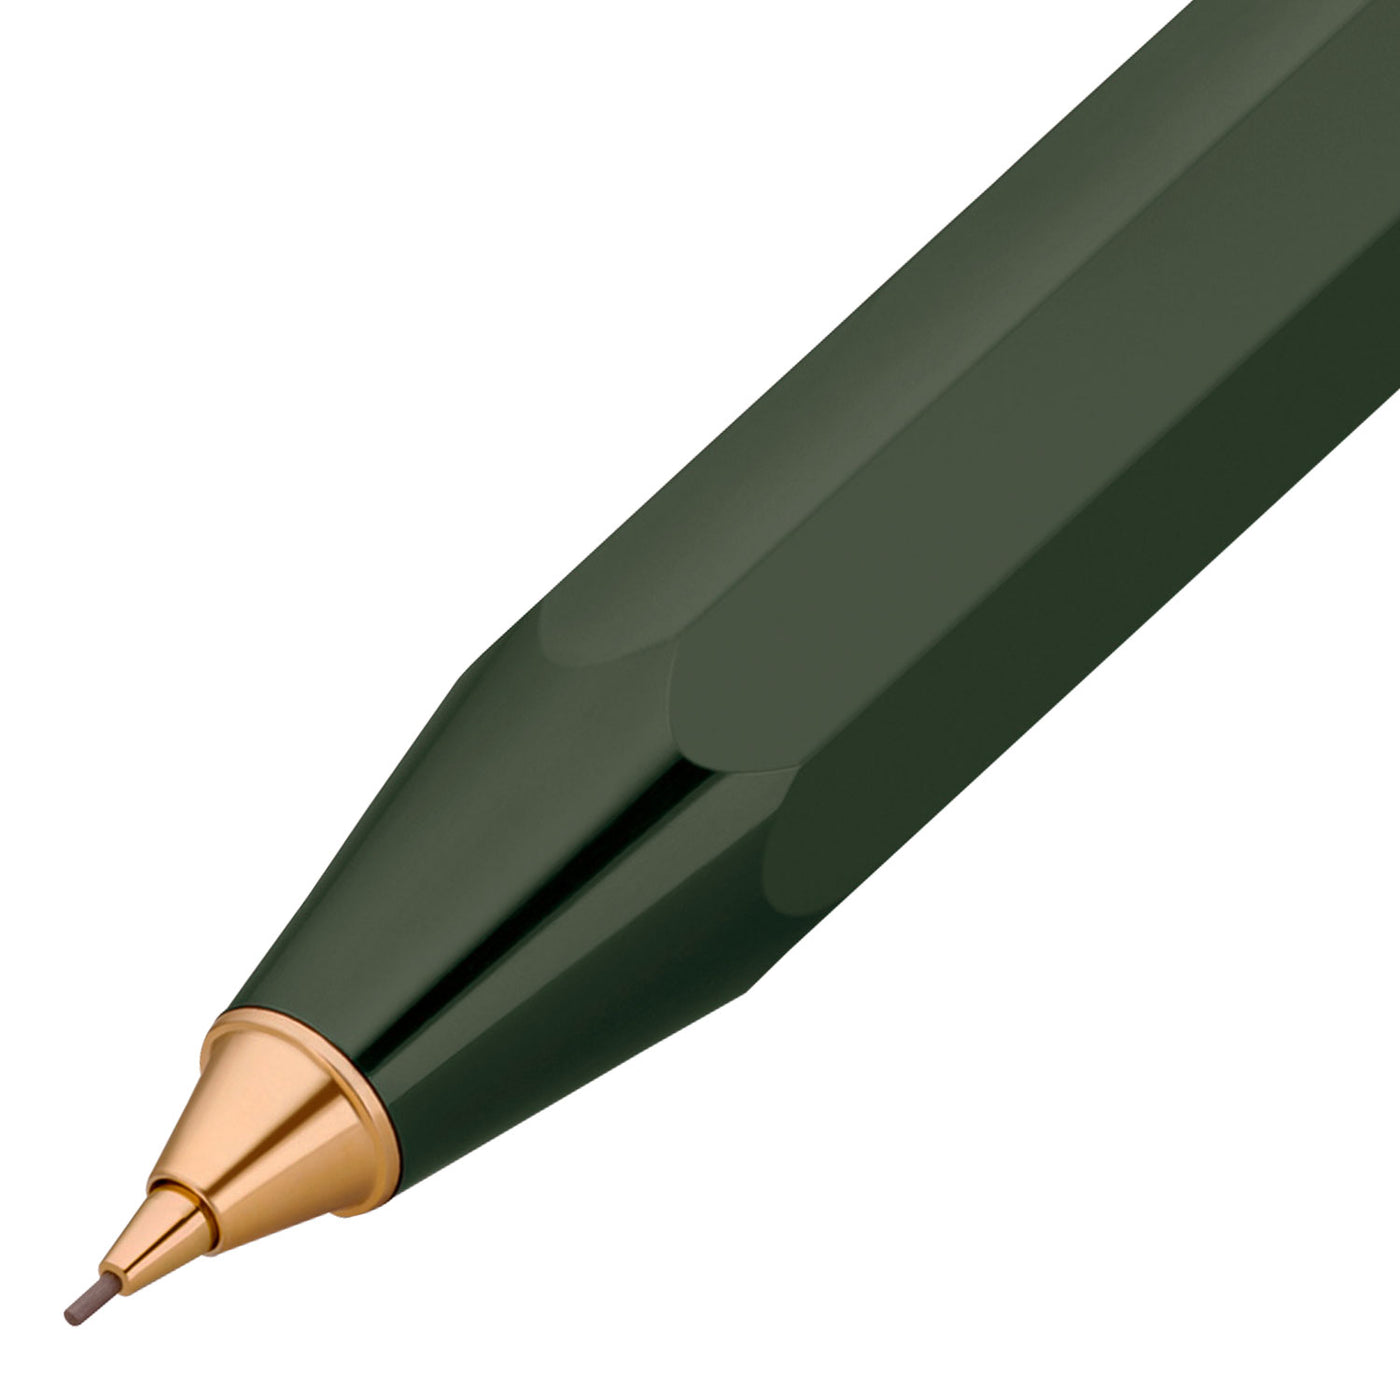 Kaweco Classic Sport 0.7mm Mechanical Pencil with Optional Clip - Green